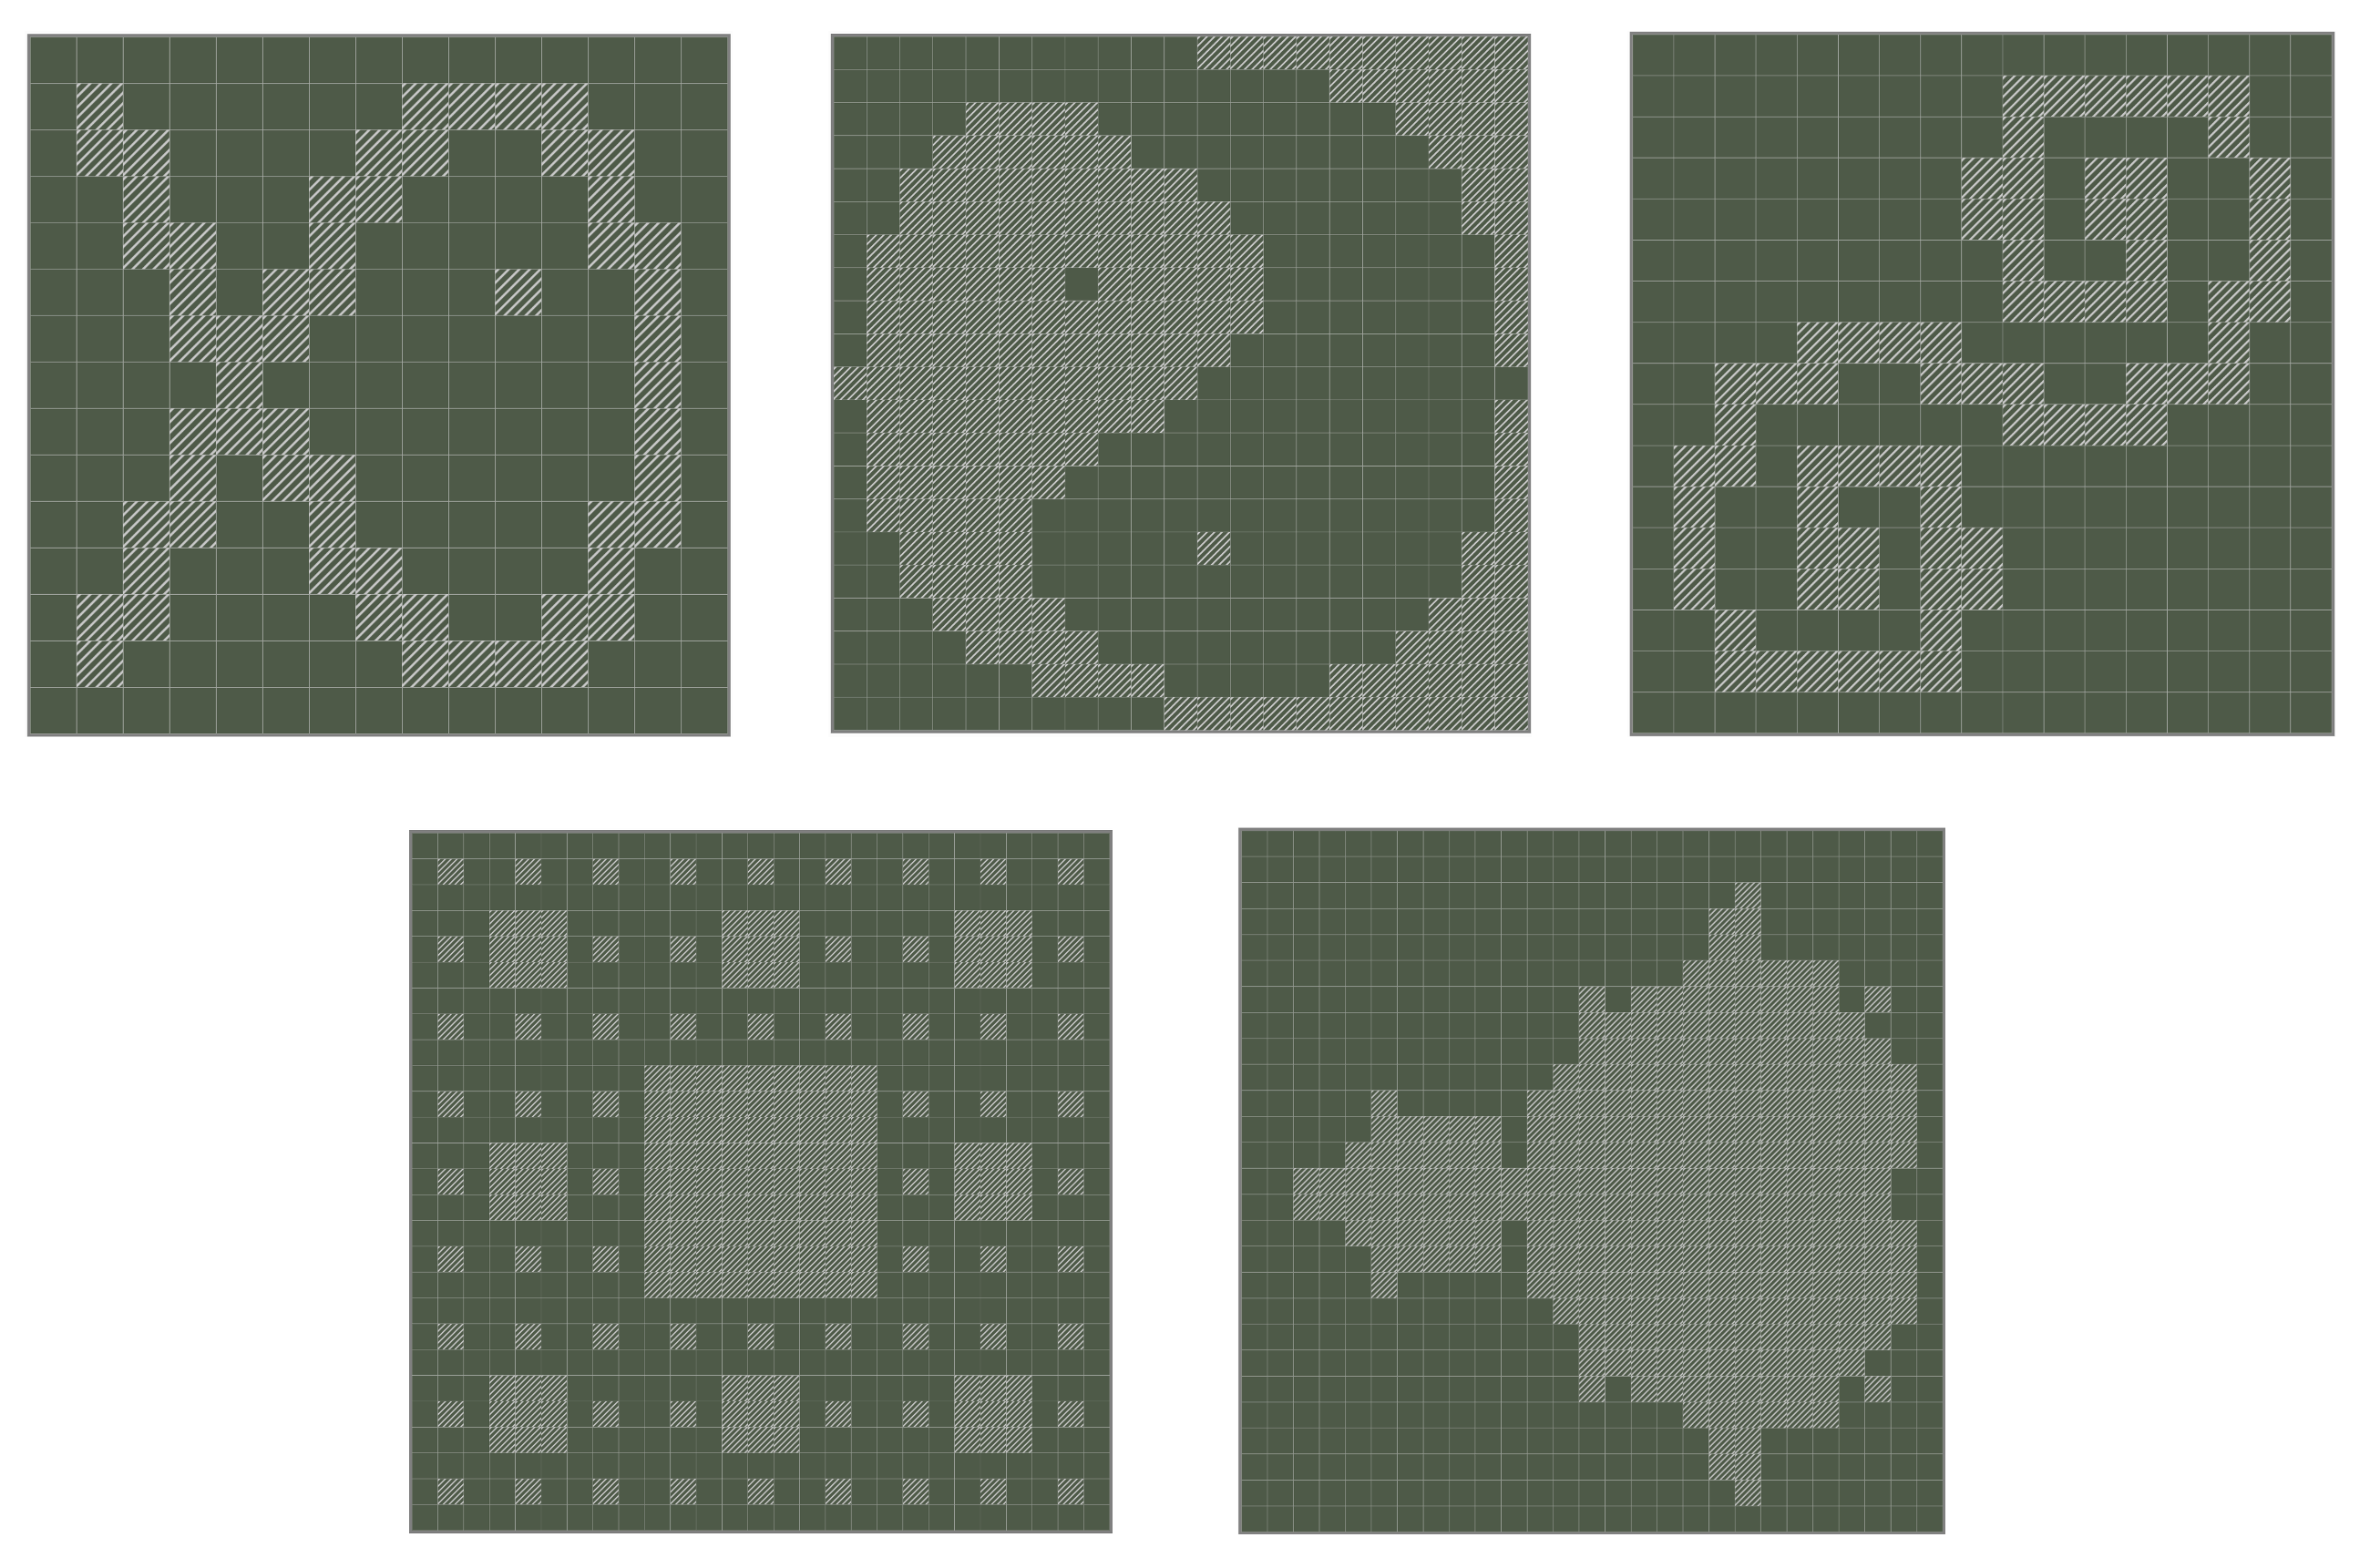 Gallery of several checkboard pattern challenges